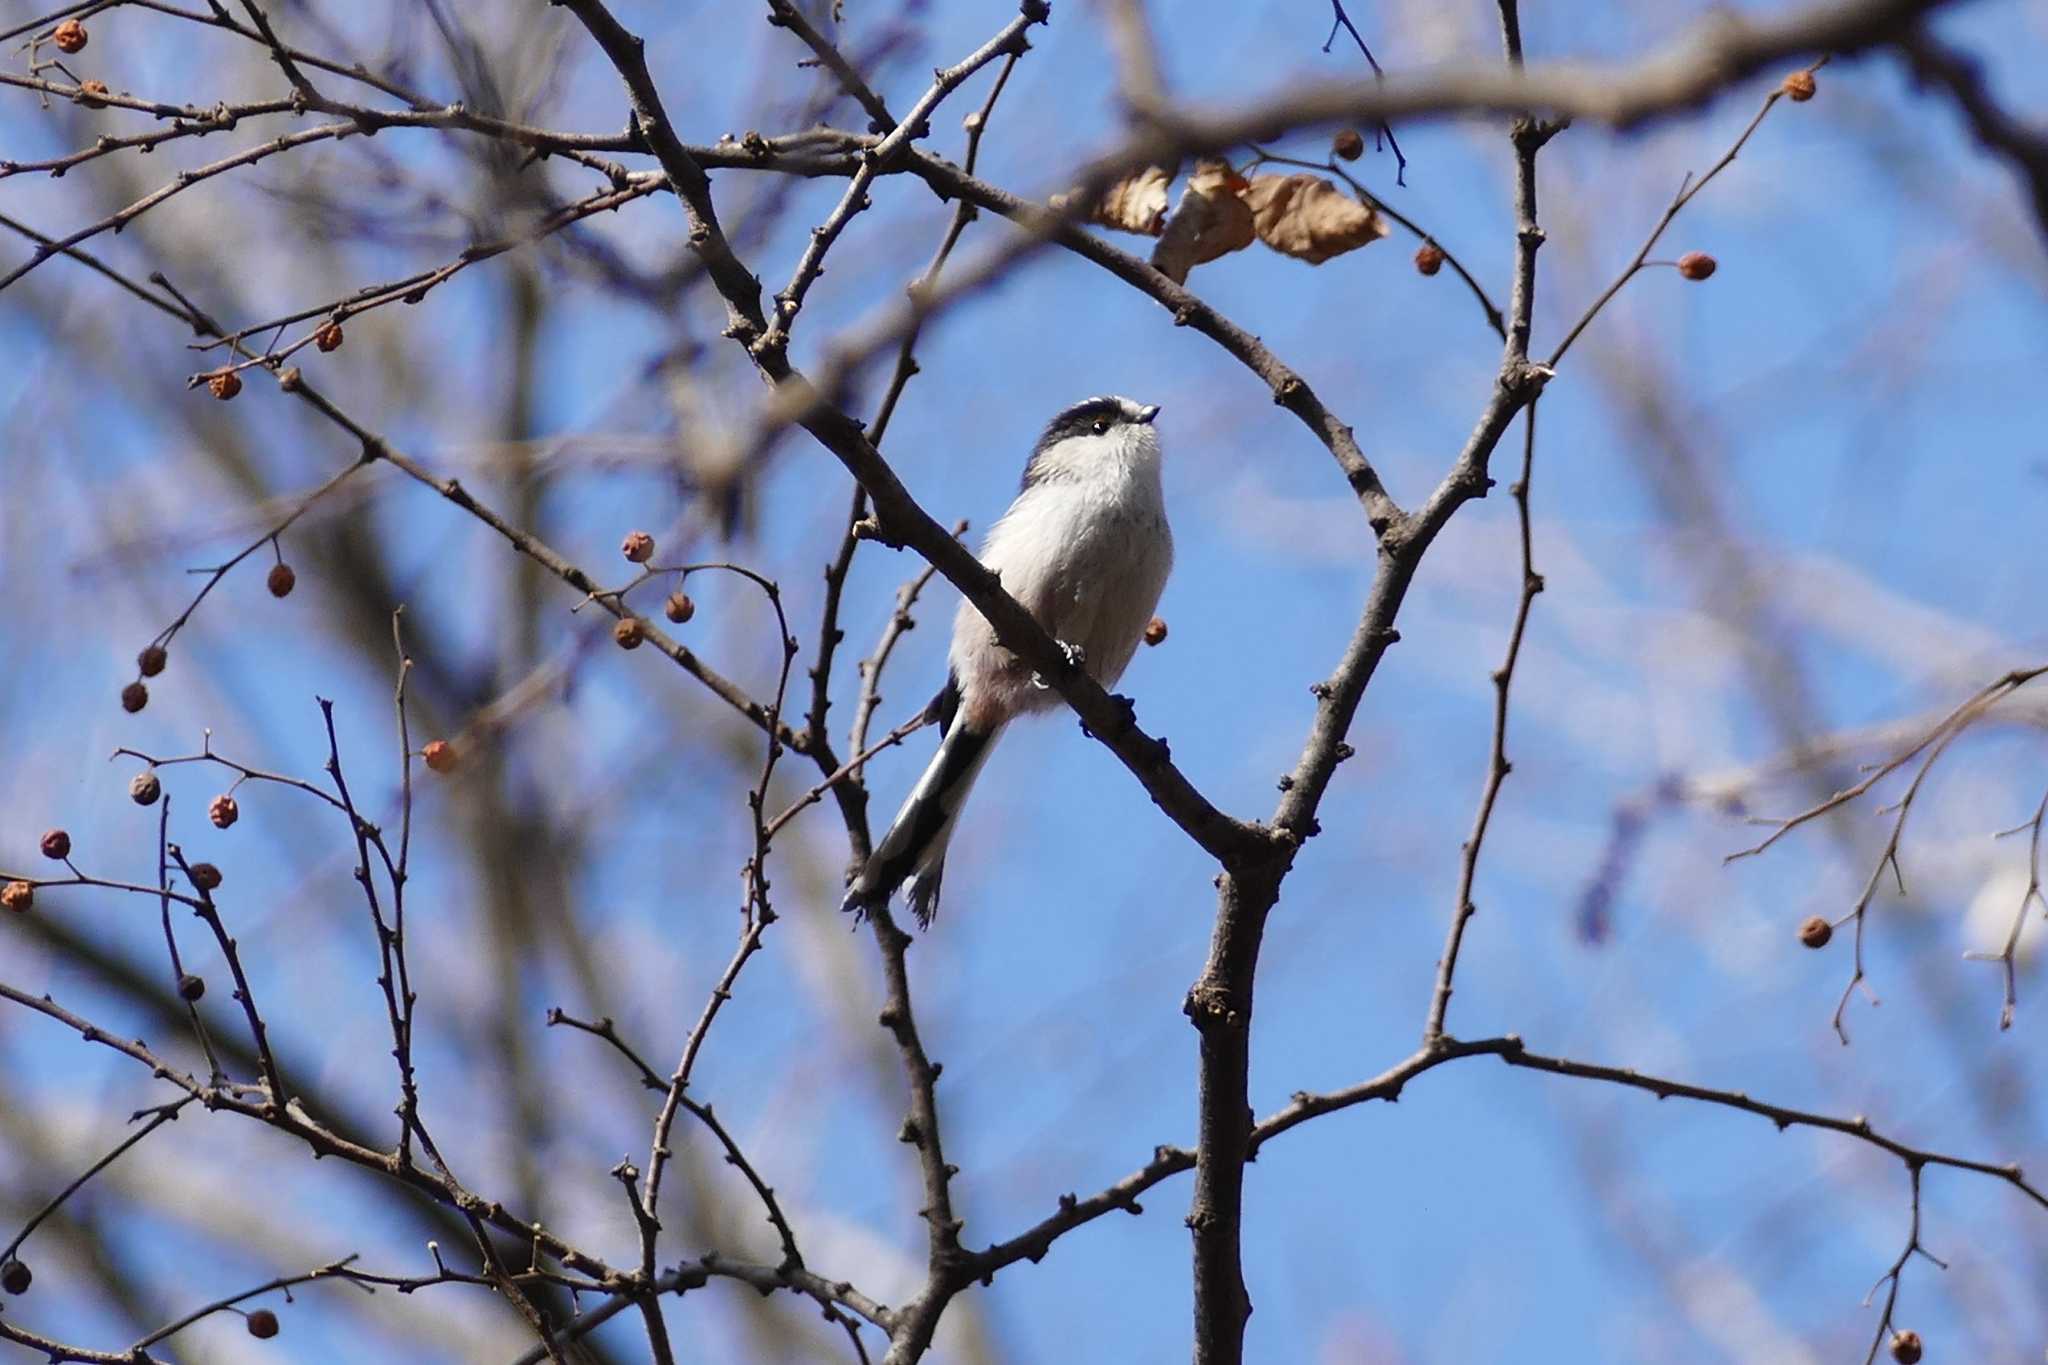 Photo of Long-tailed Tit at 東京都 by アカウント5509